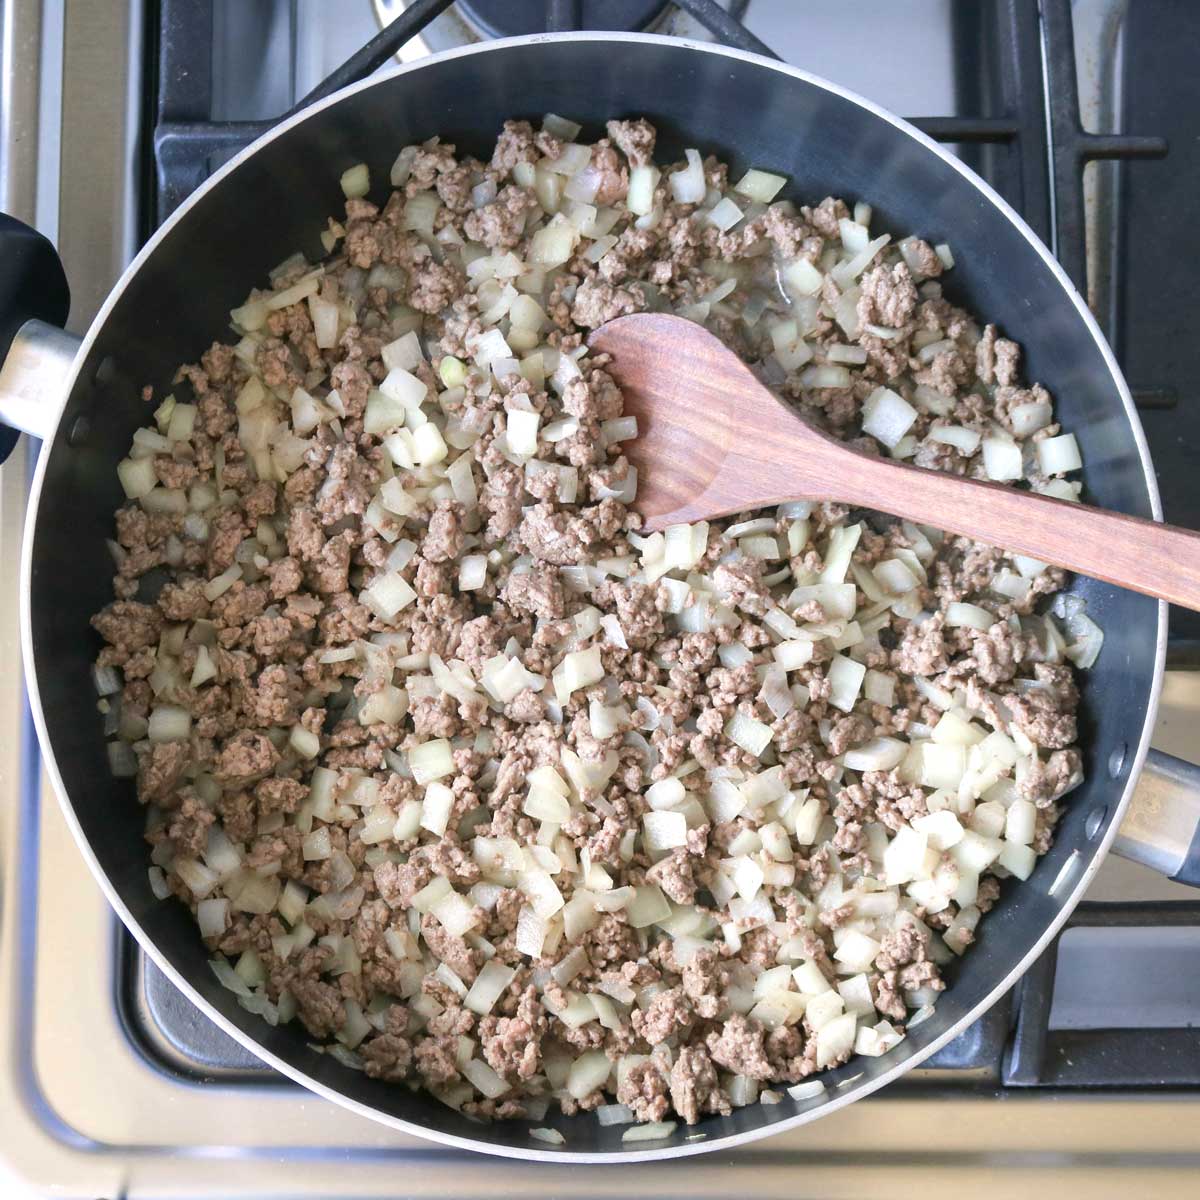 Overhead of large skillet on stove with cooked onions and ground beef with wooden spoon stirring.